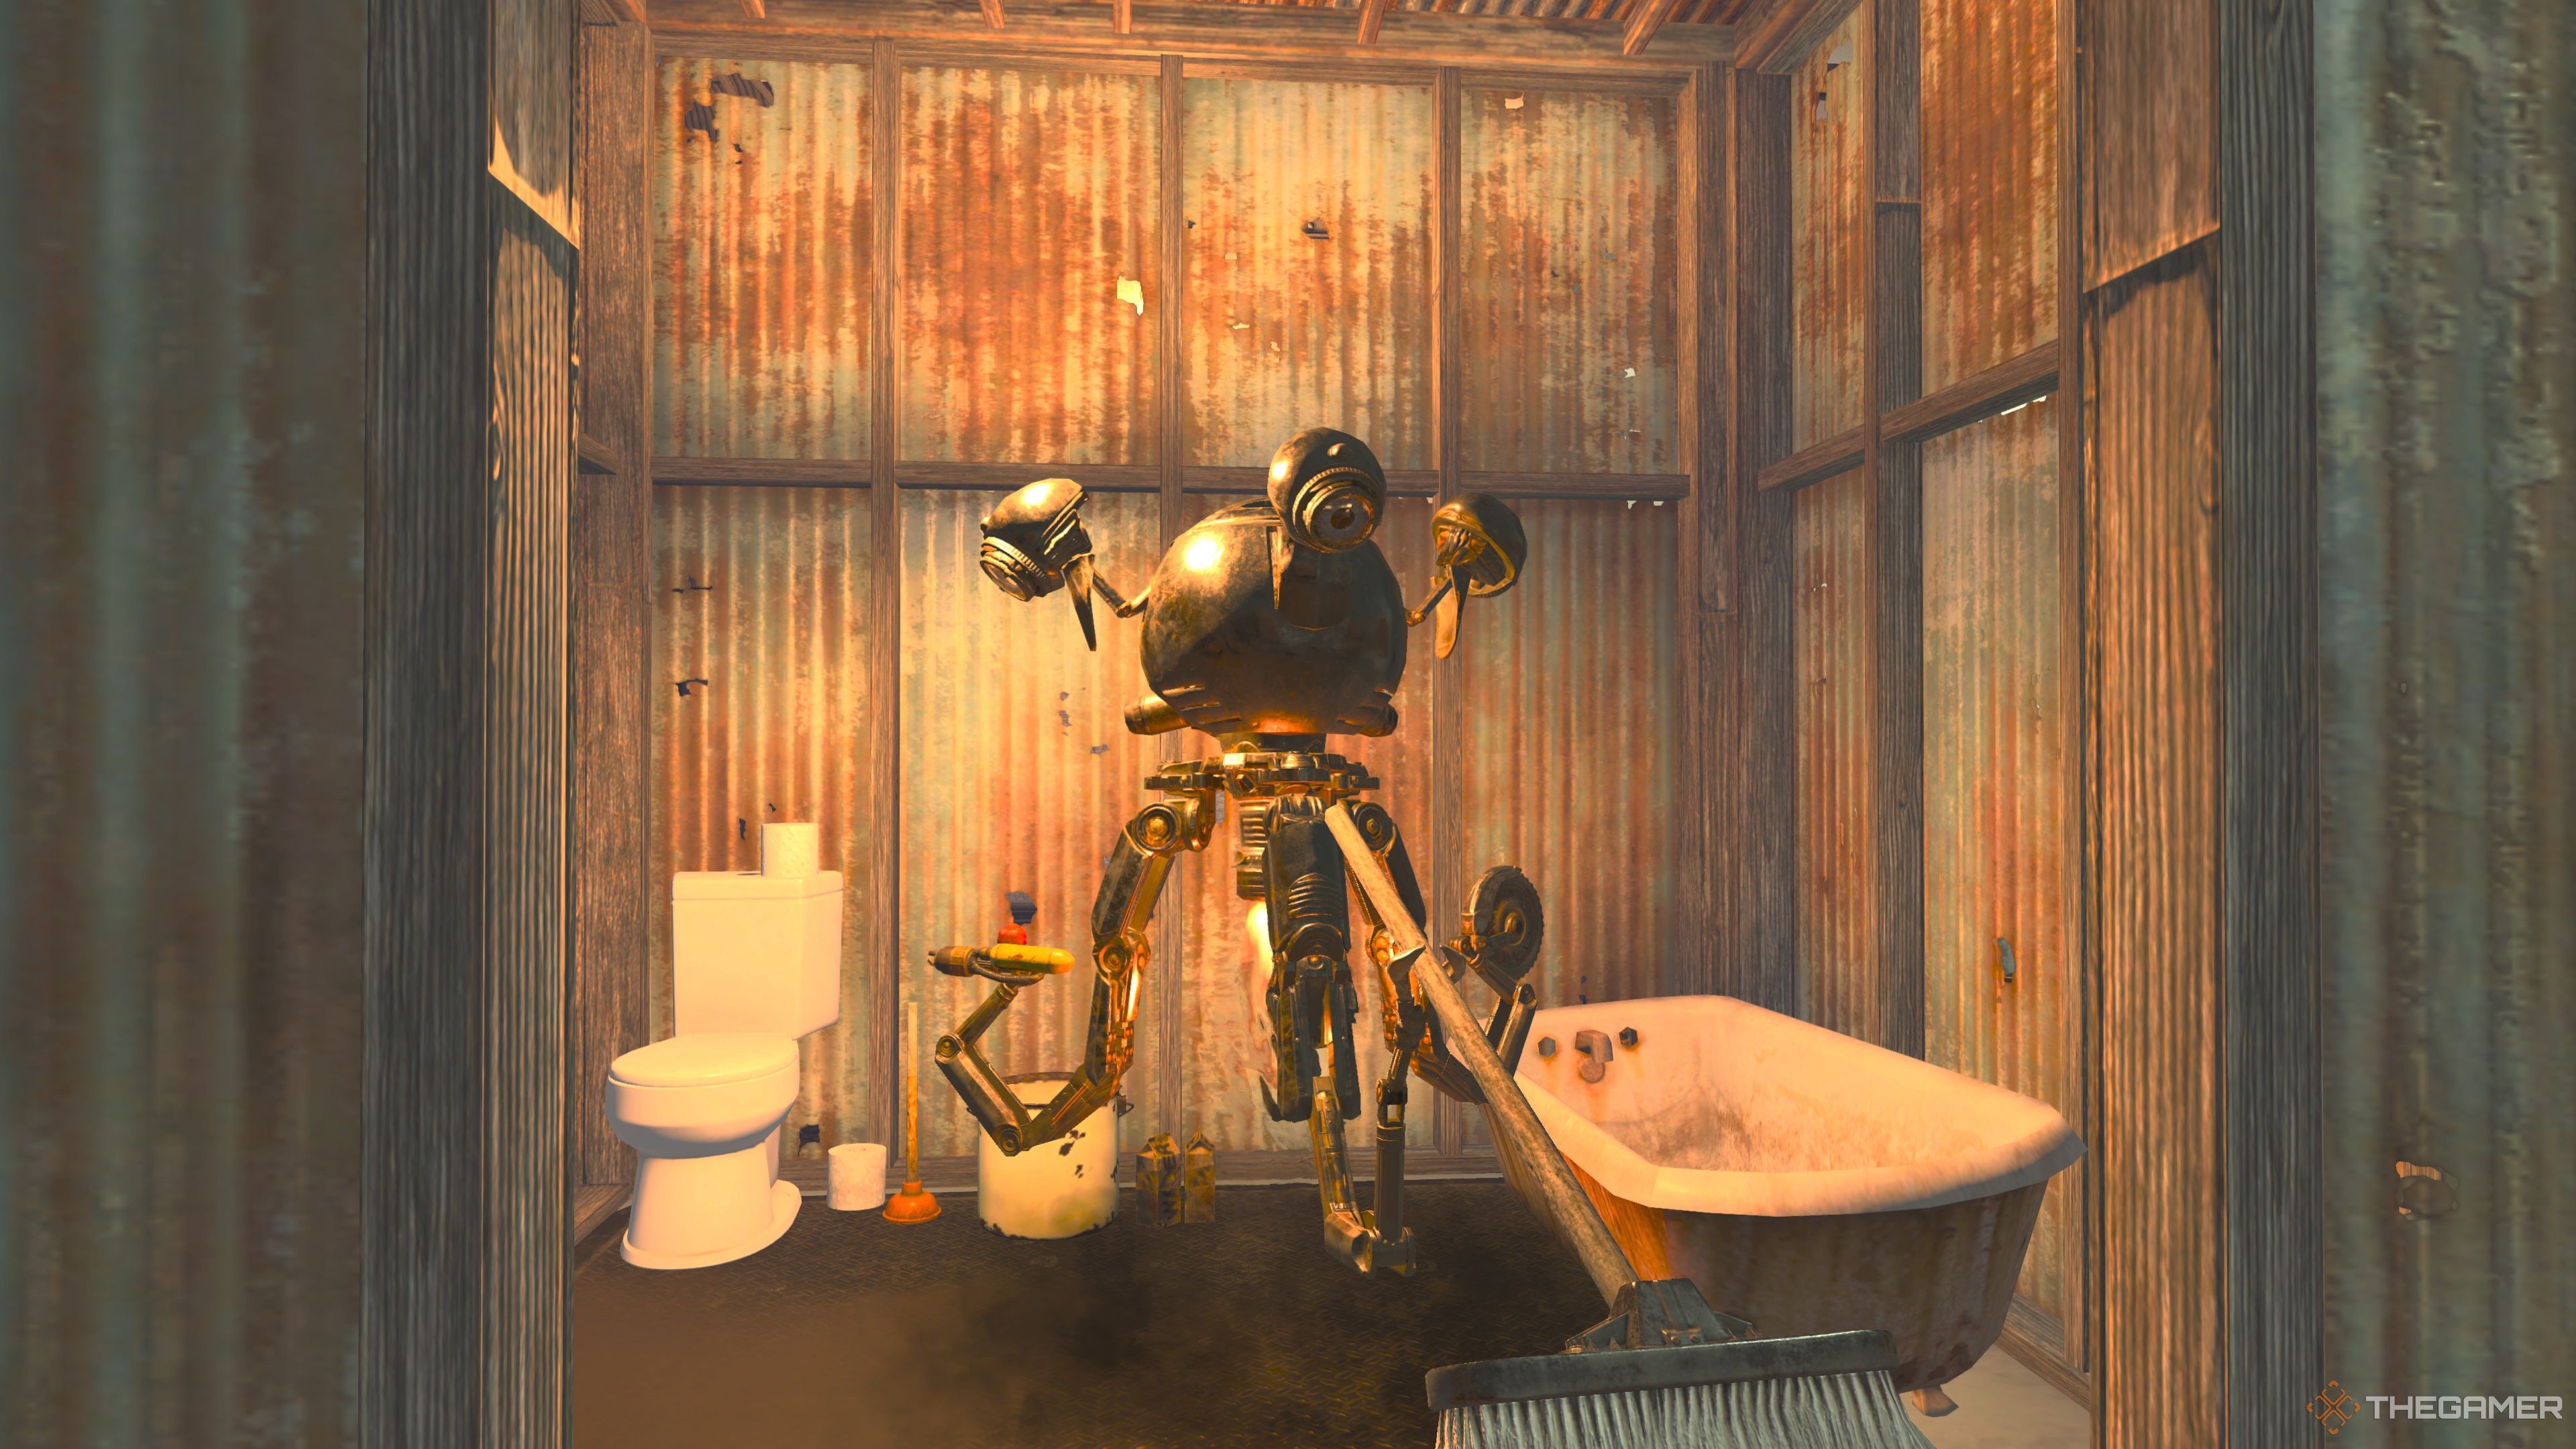 Mr. Clark cleans the bathrom in the Shelter's Claim Center in Fallout 76.